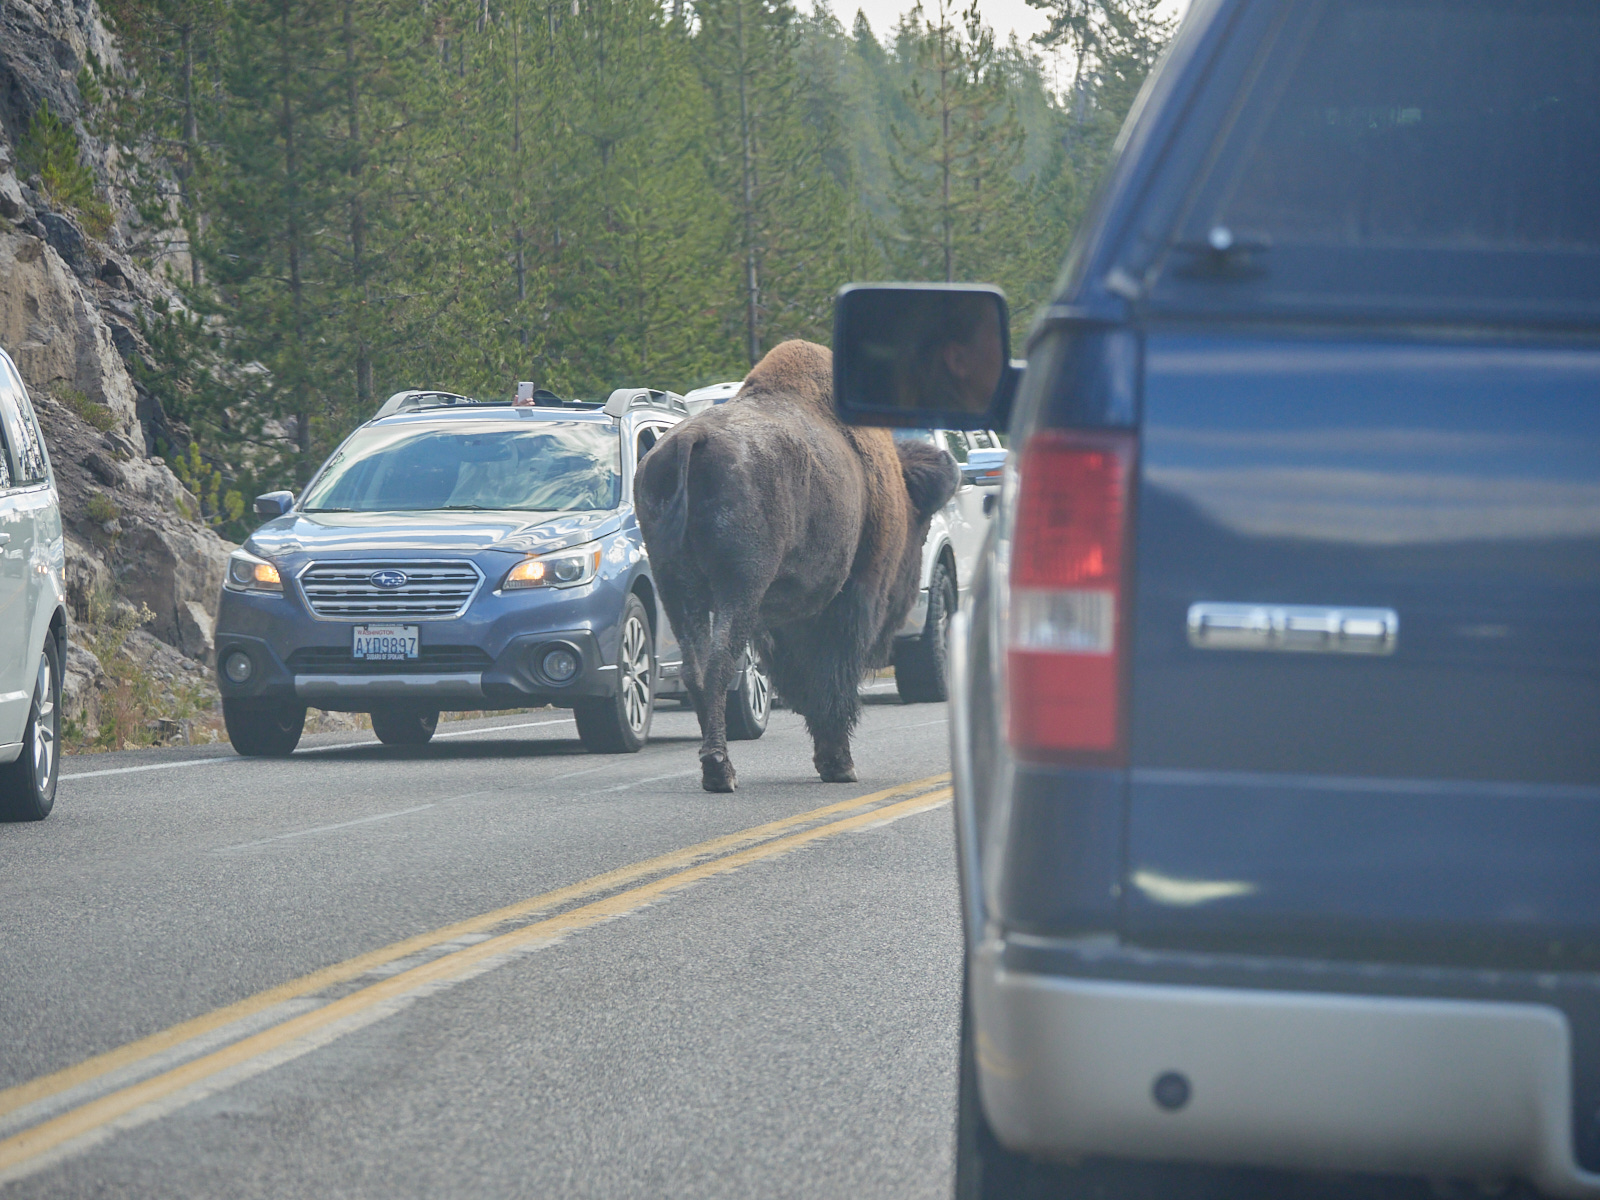 This snap is not intended as a 'good' buffalo photo, merely as an illustration of the phenomenon.